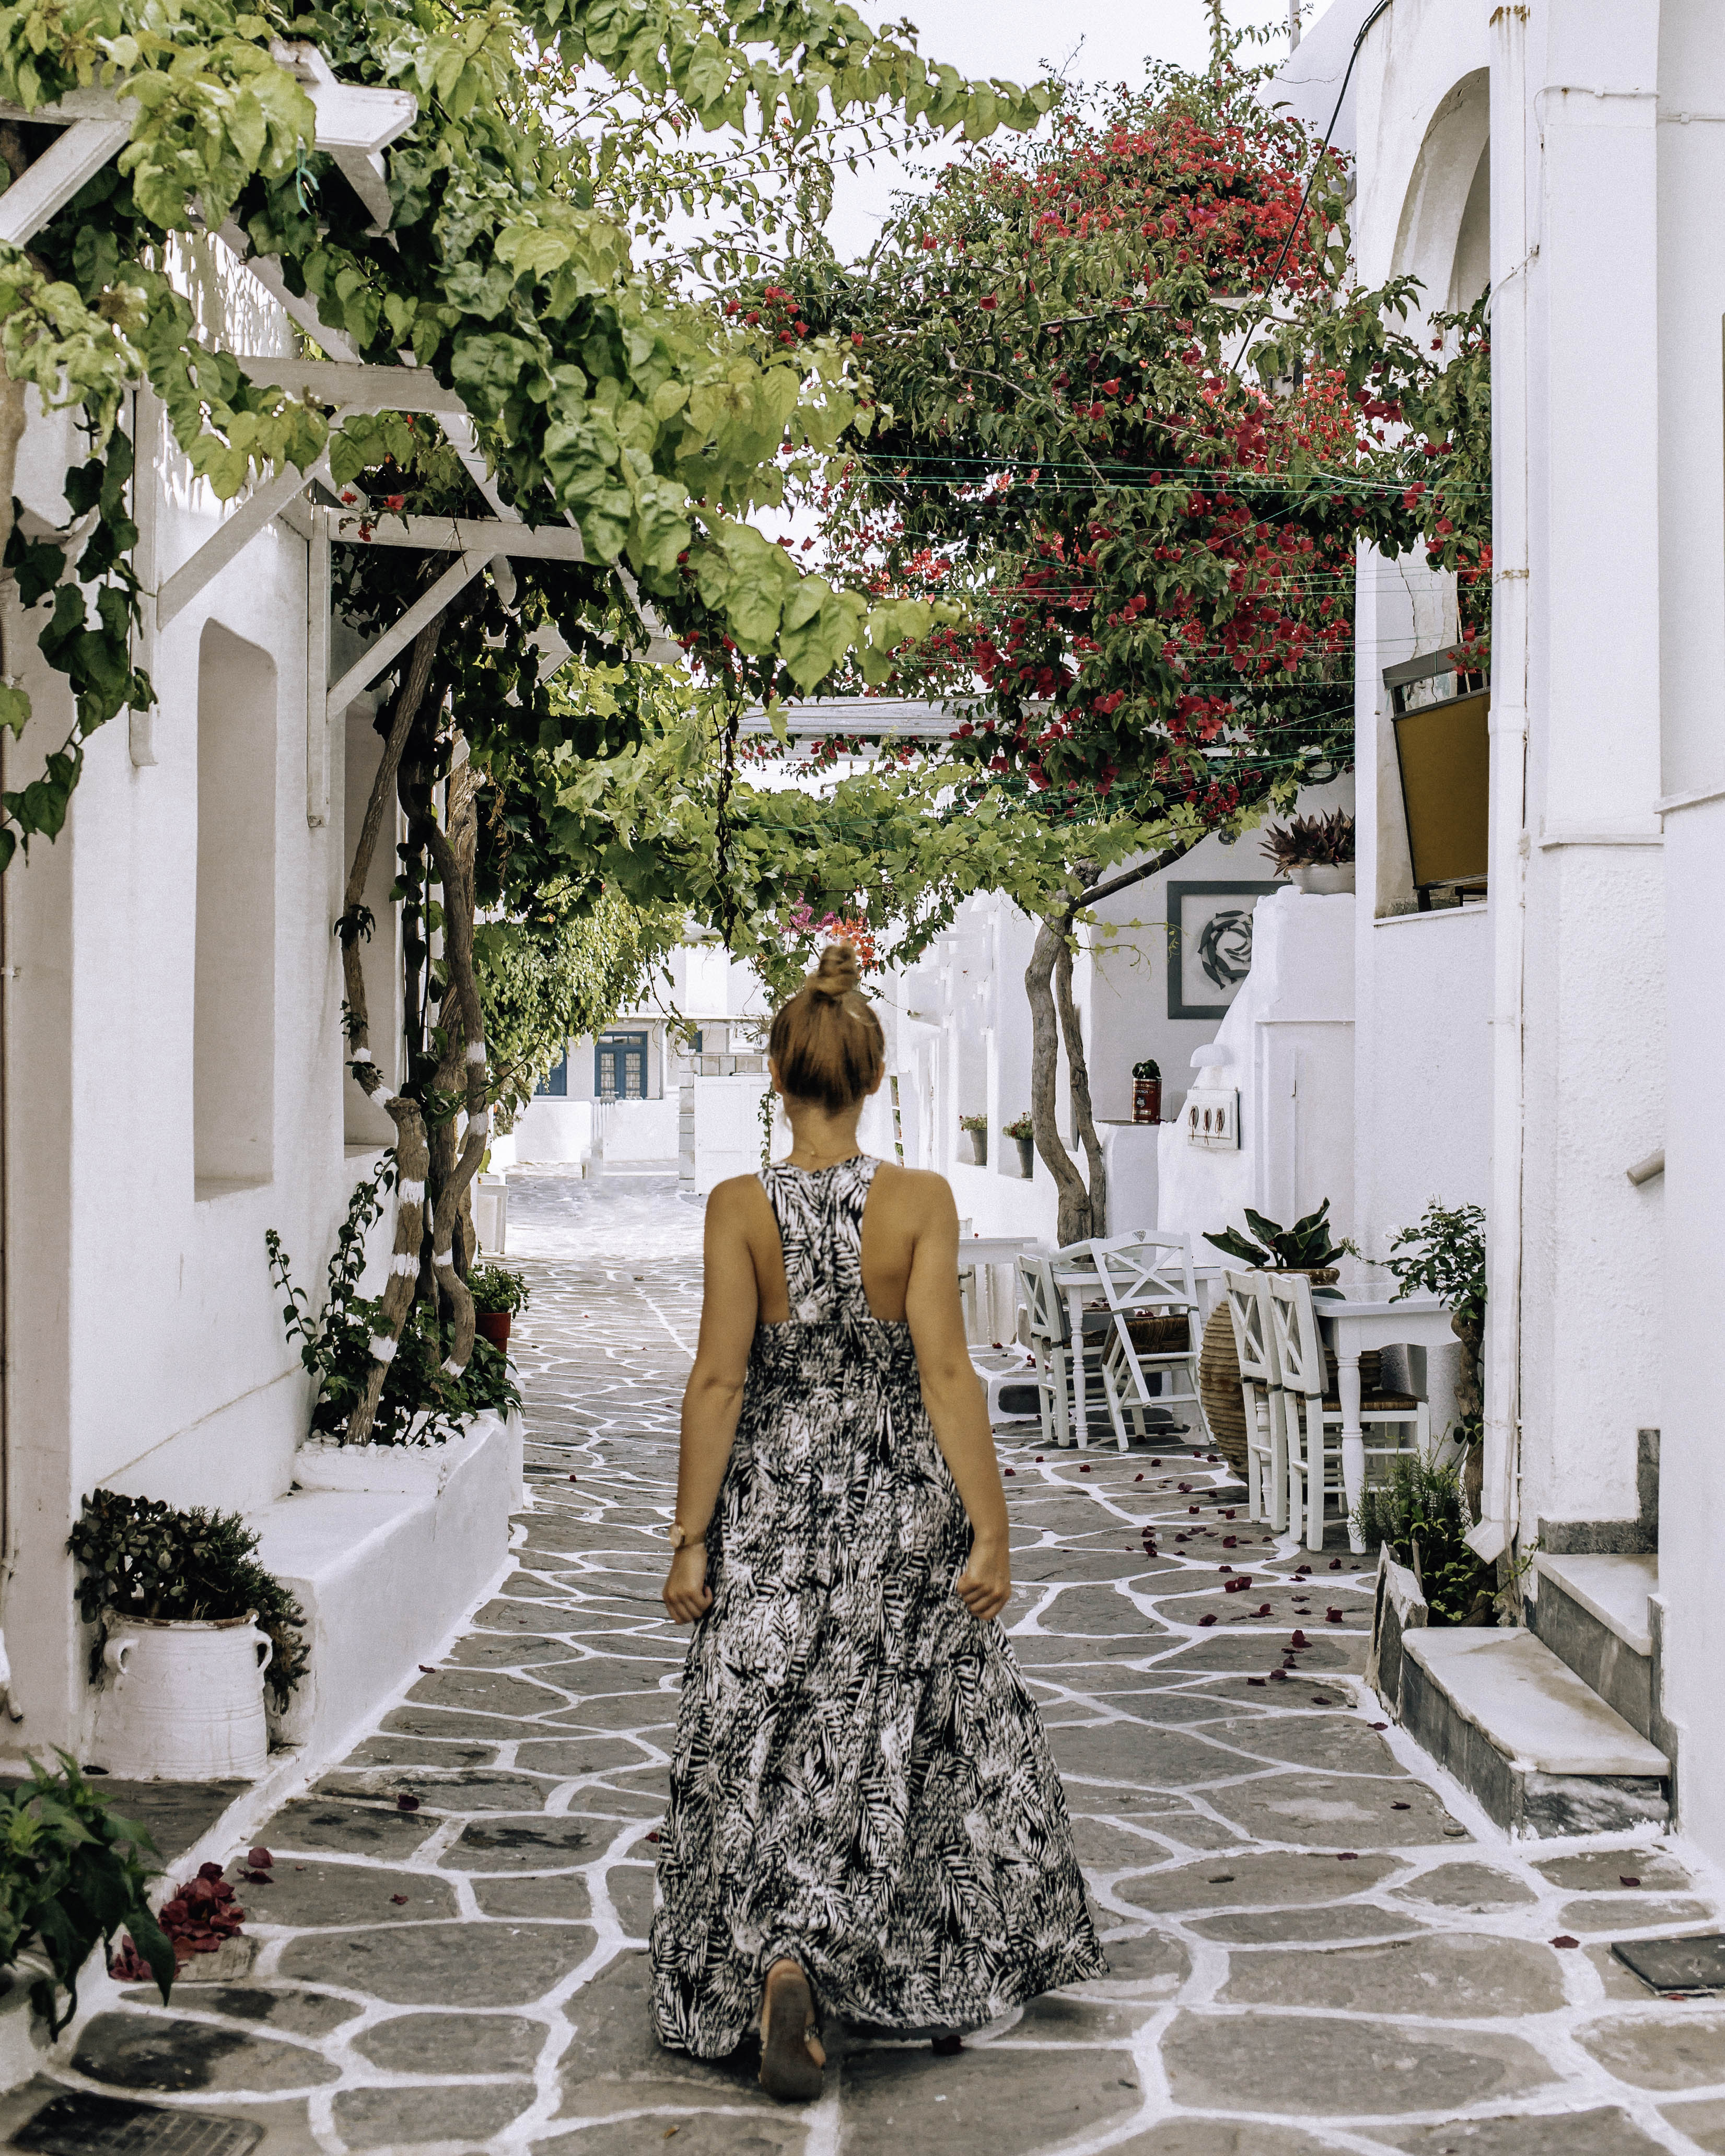 Naoussa-3 What I learned from my solo Greece travel